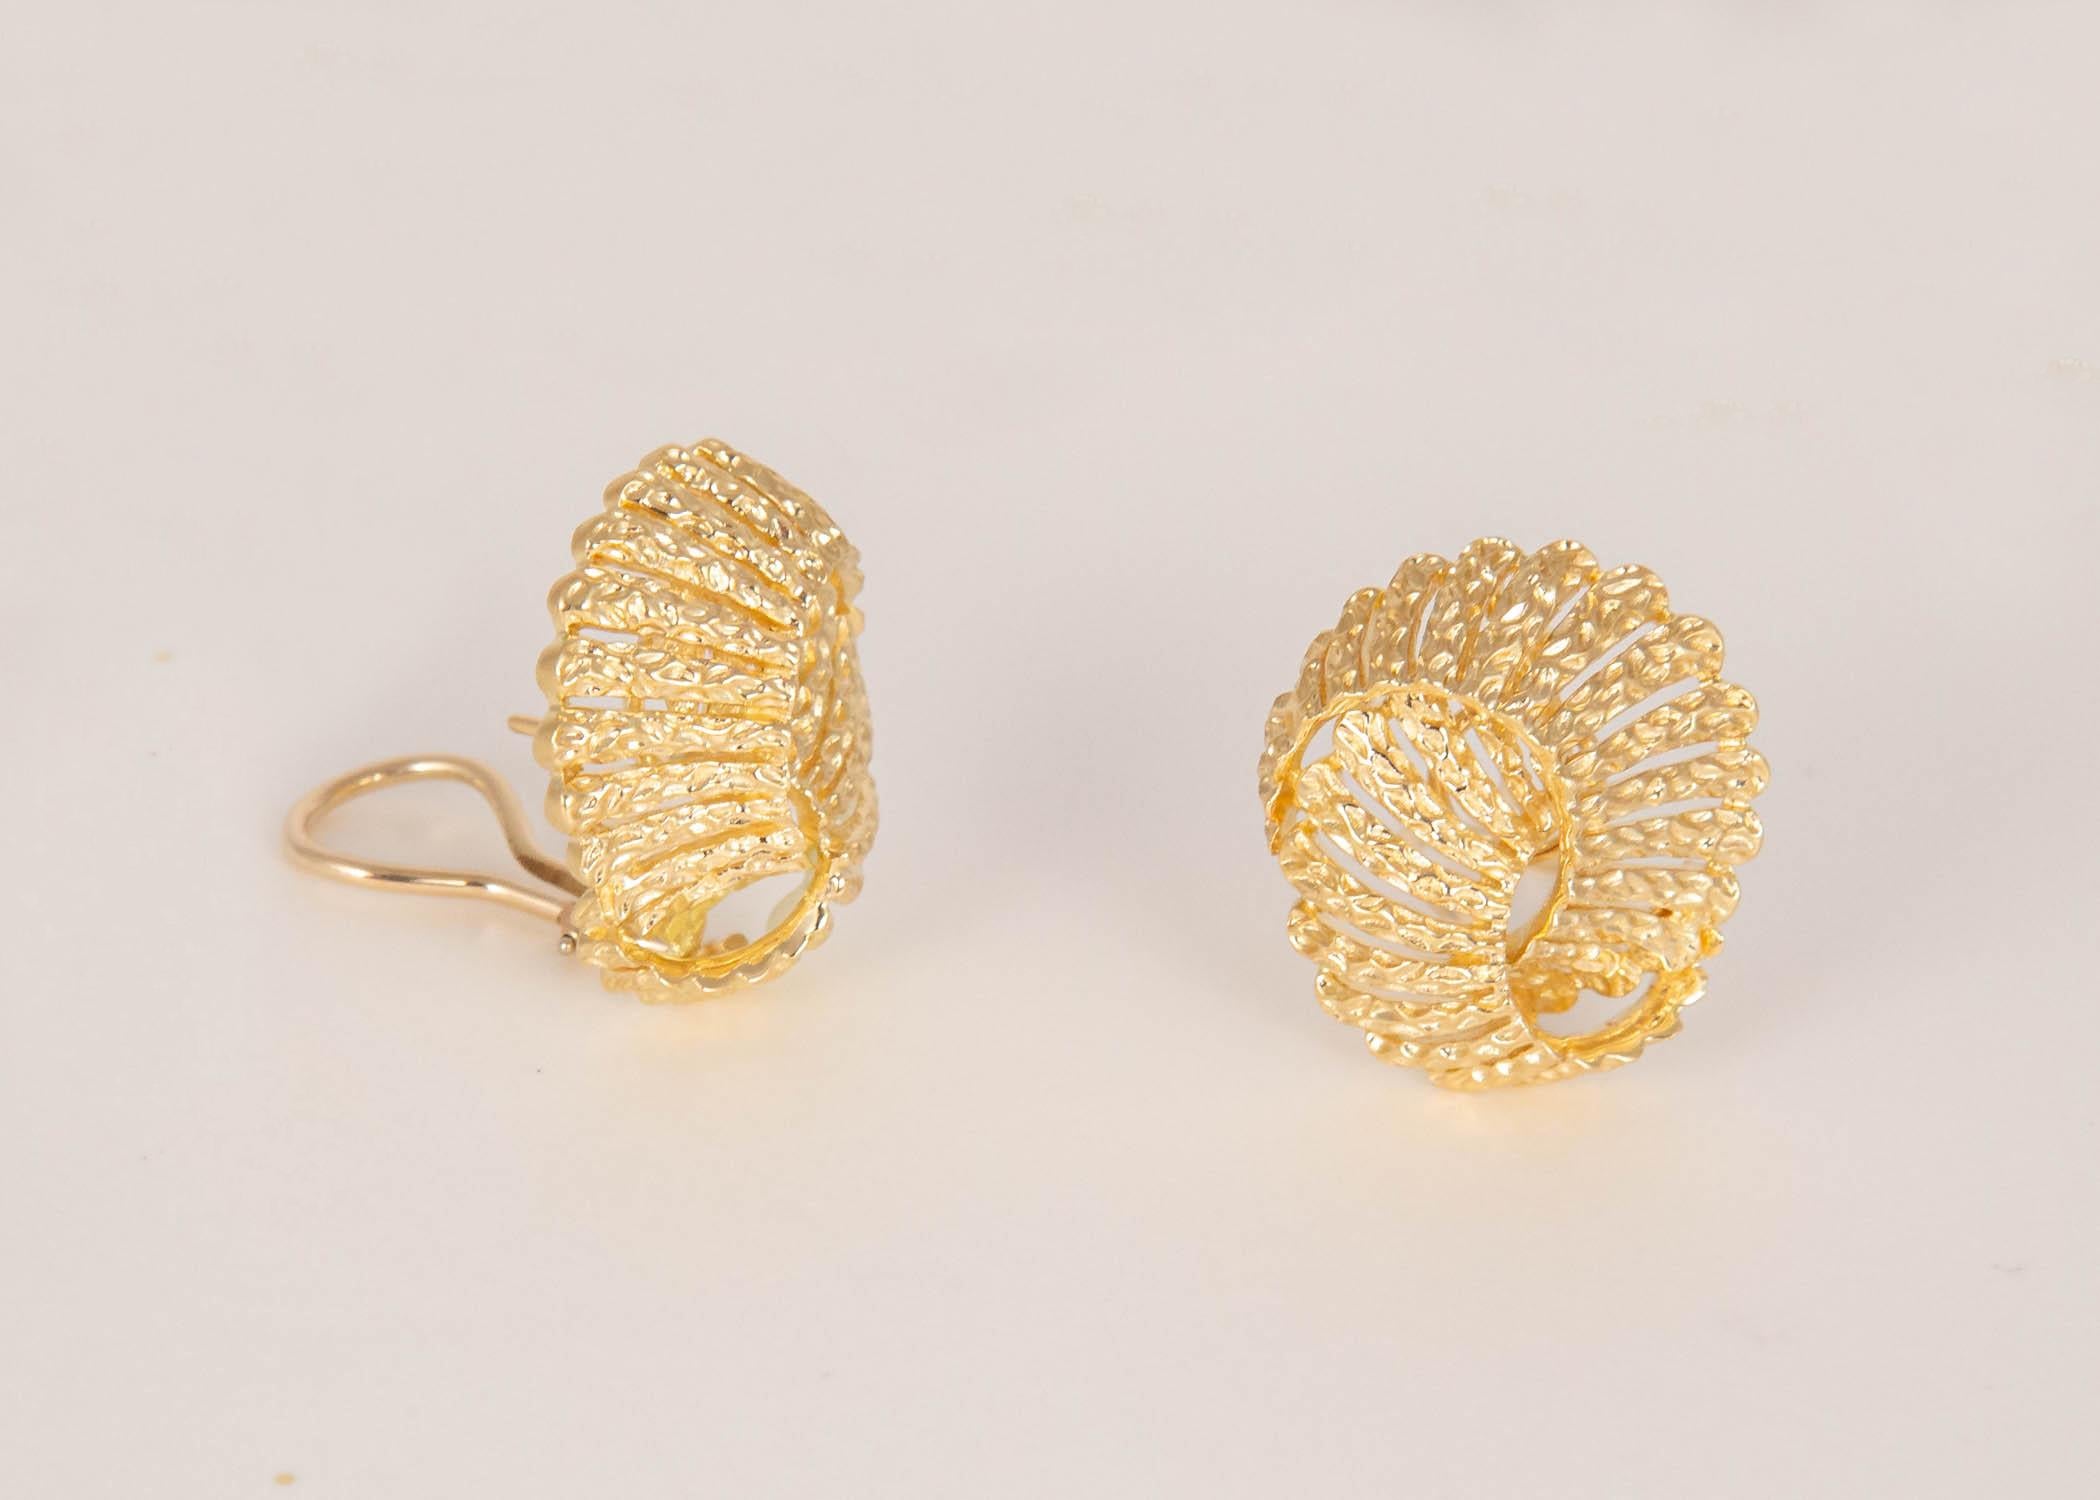 Simply elegant. This pair of Tiffany & Co. openwork gold earrings are a great example of the classic design and quality Tiffany is famous for. 1 inch in size.